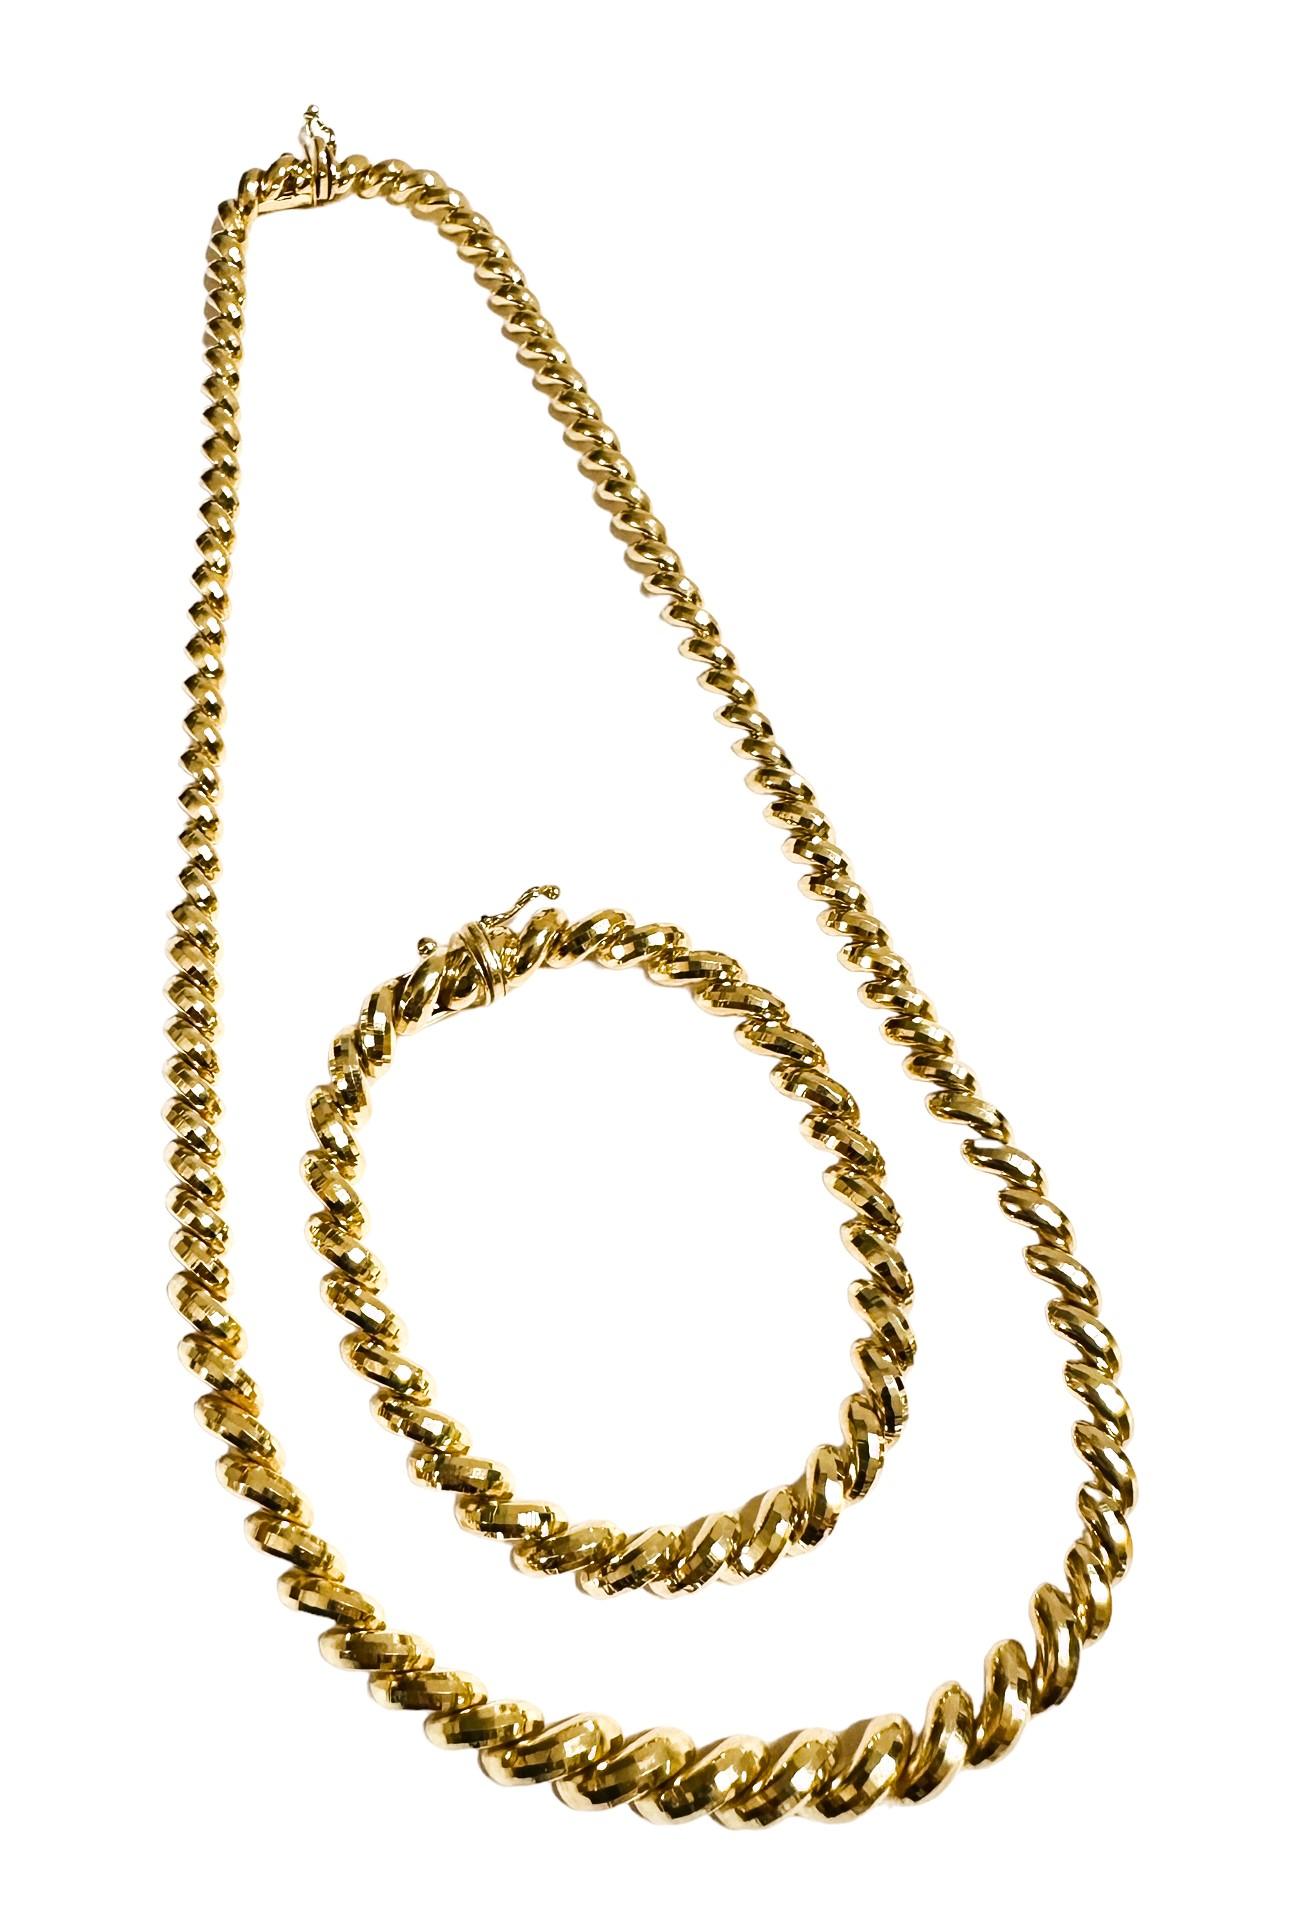 14k Yellow Gold Graduated San Marco Necklace 17.5